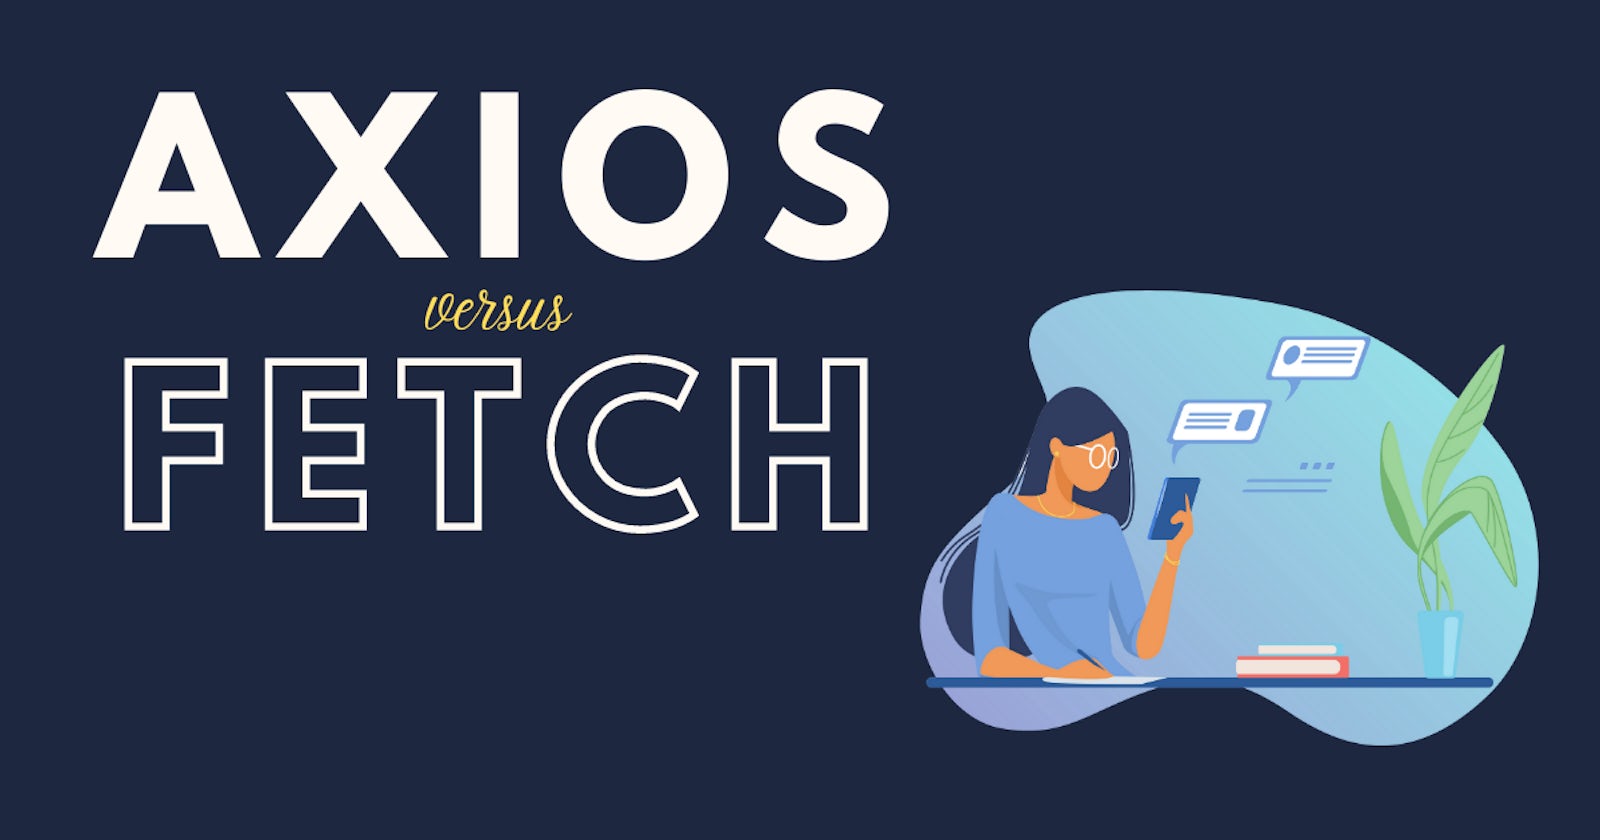 Axios vs. Fetch: which should I use?